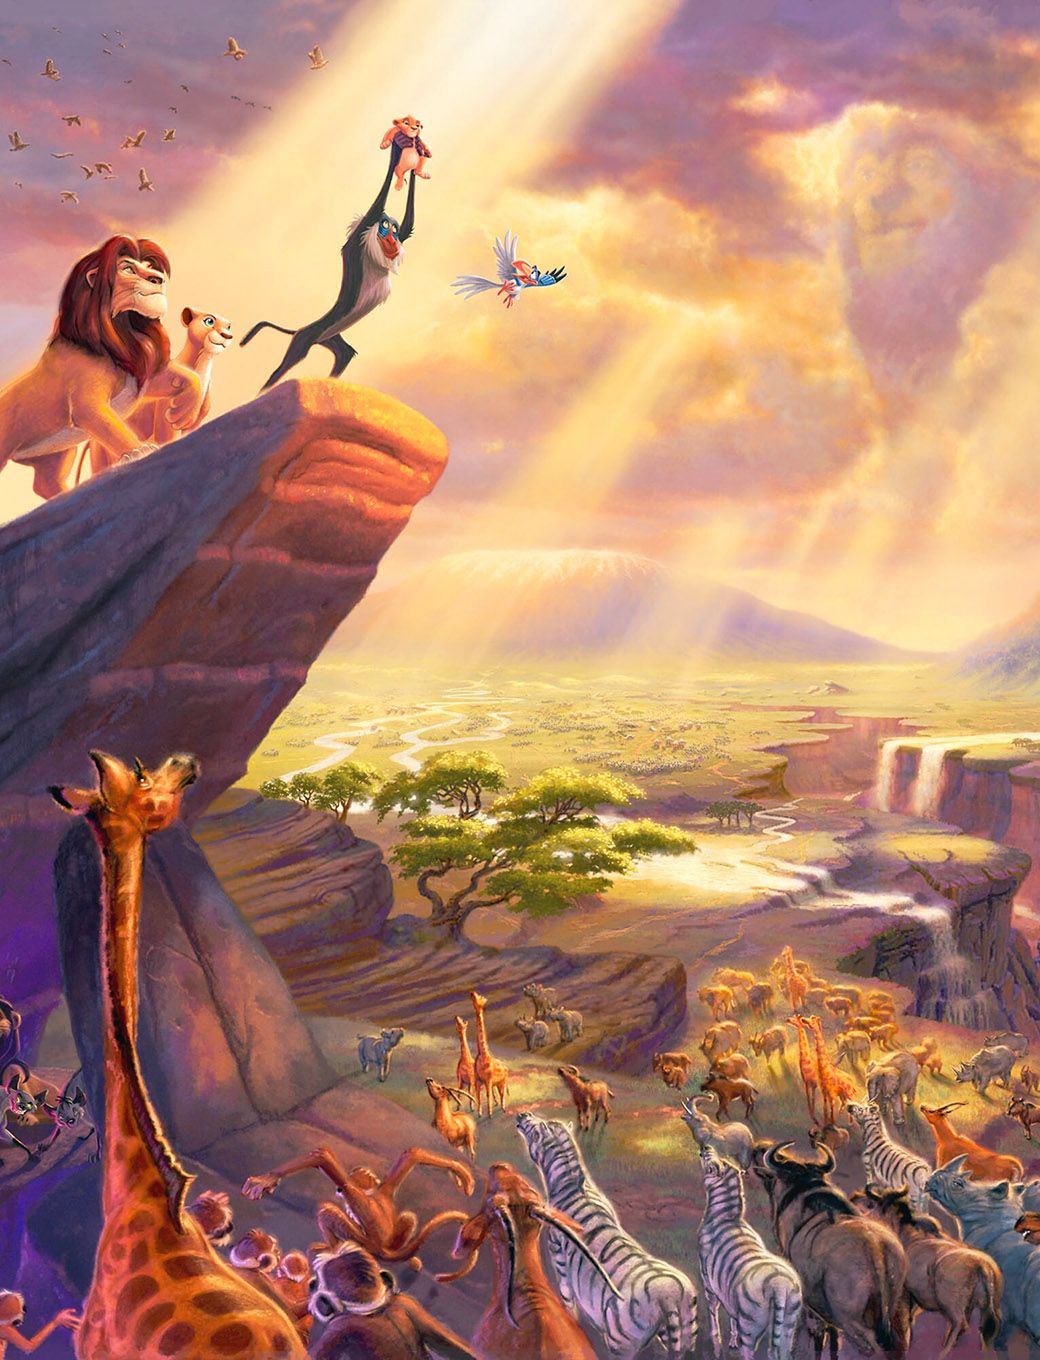 The Lion King artwork featuring Simba, Nala, and Timon and Pumbaa overlooking the Pride Lands. - The Lion King